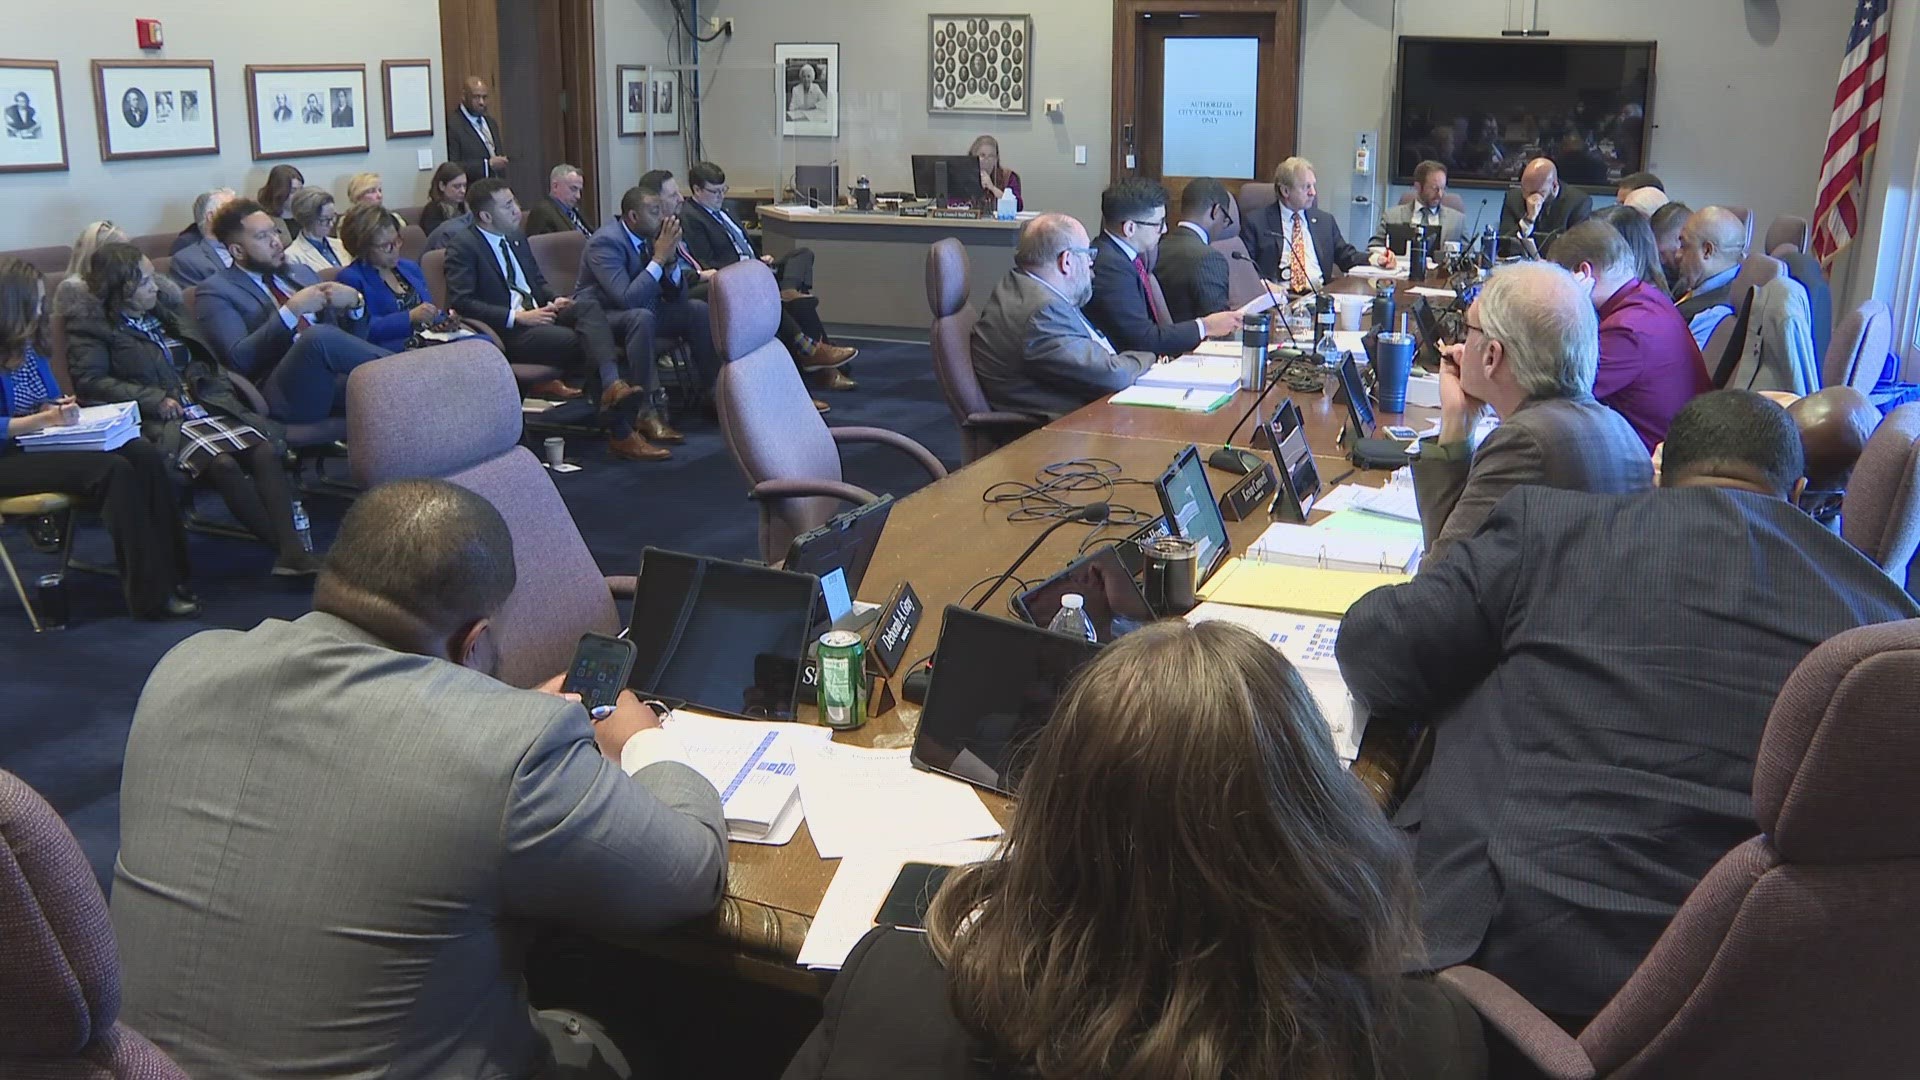 Mayor Justin Bibb's proposal calls for less budgeted police positions, but some councilmembers are accusing him of 'waving the white flag' in hiring more officers.